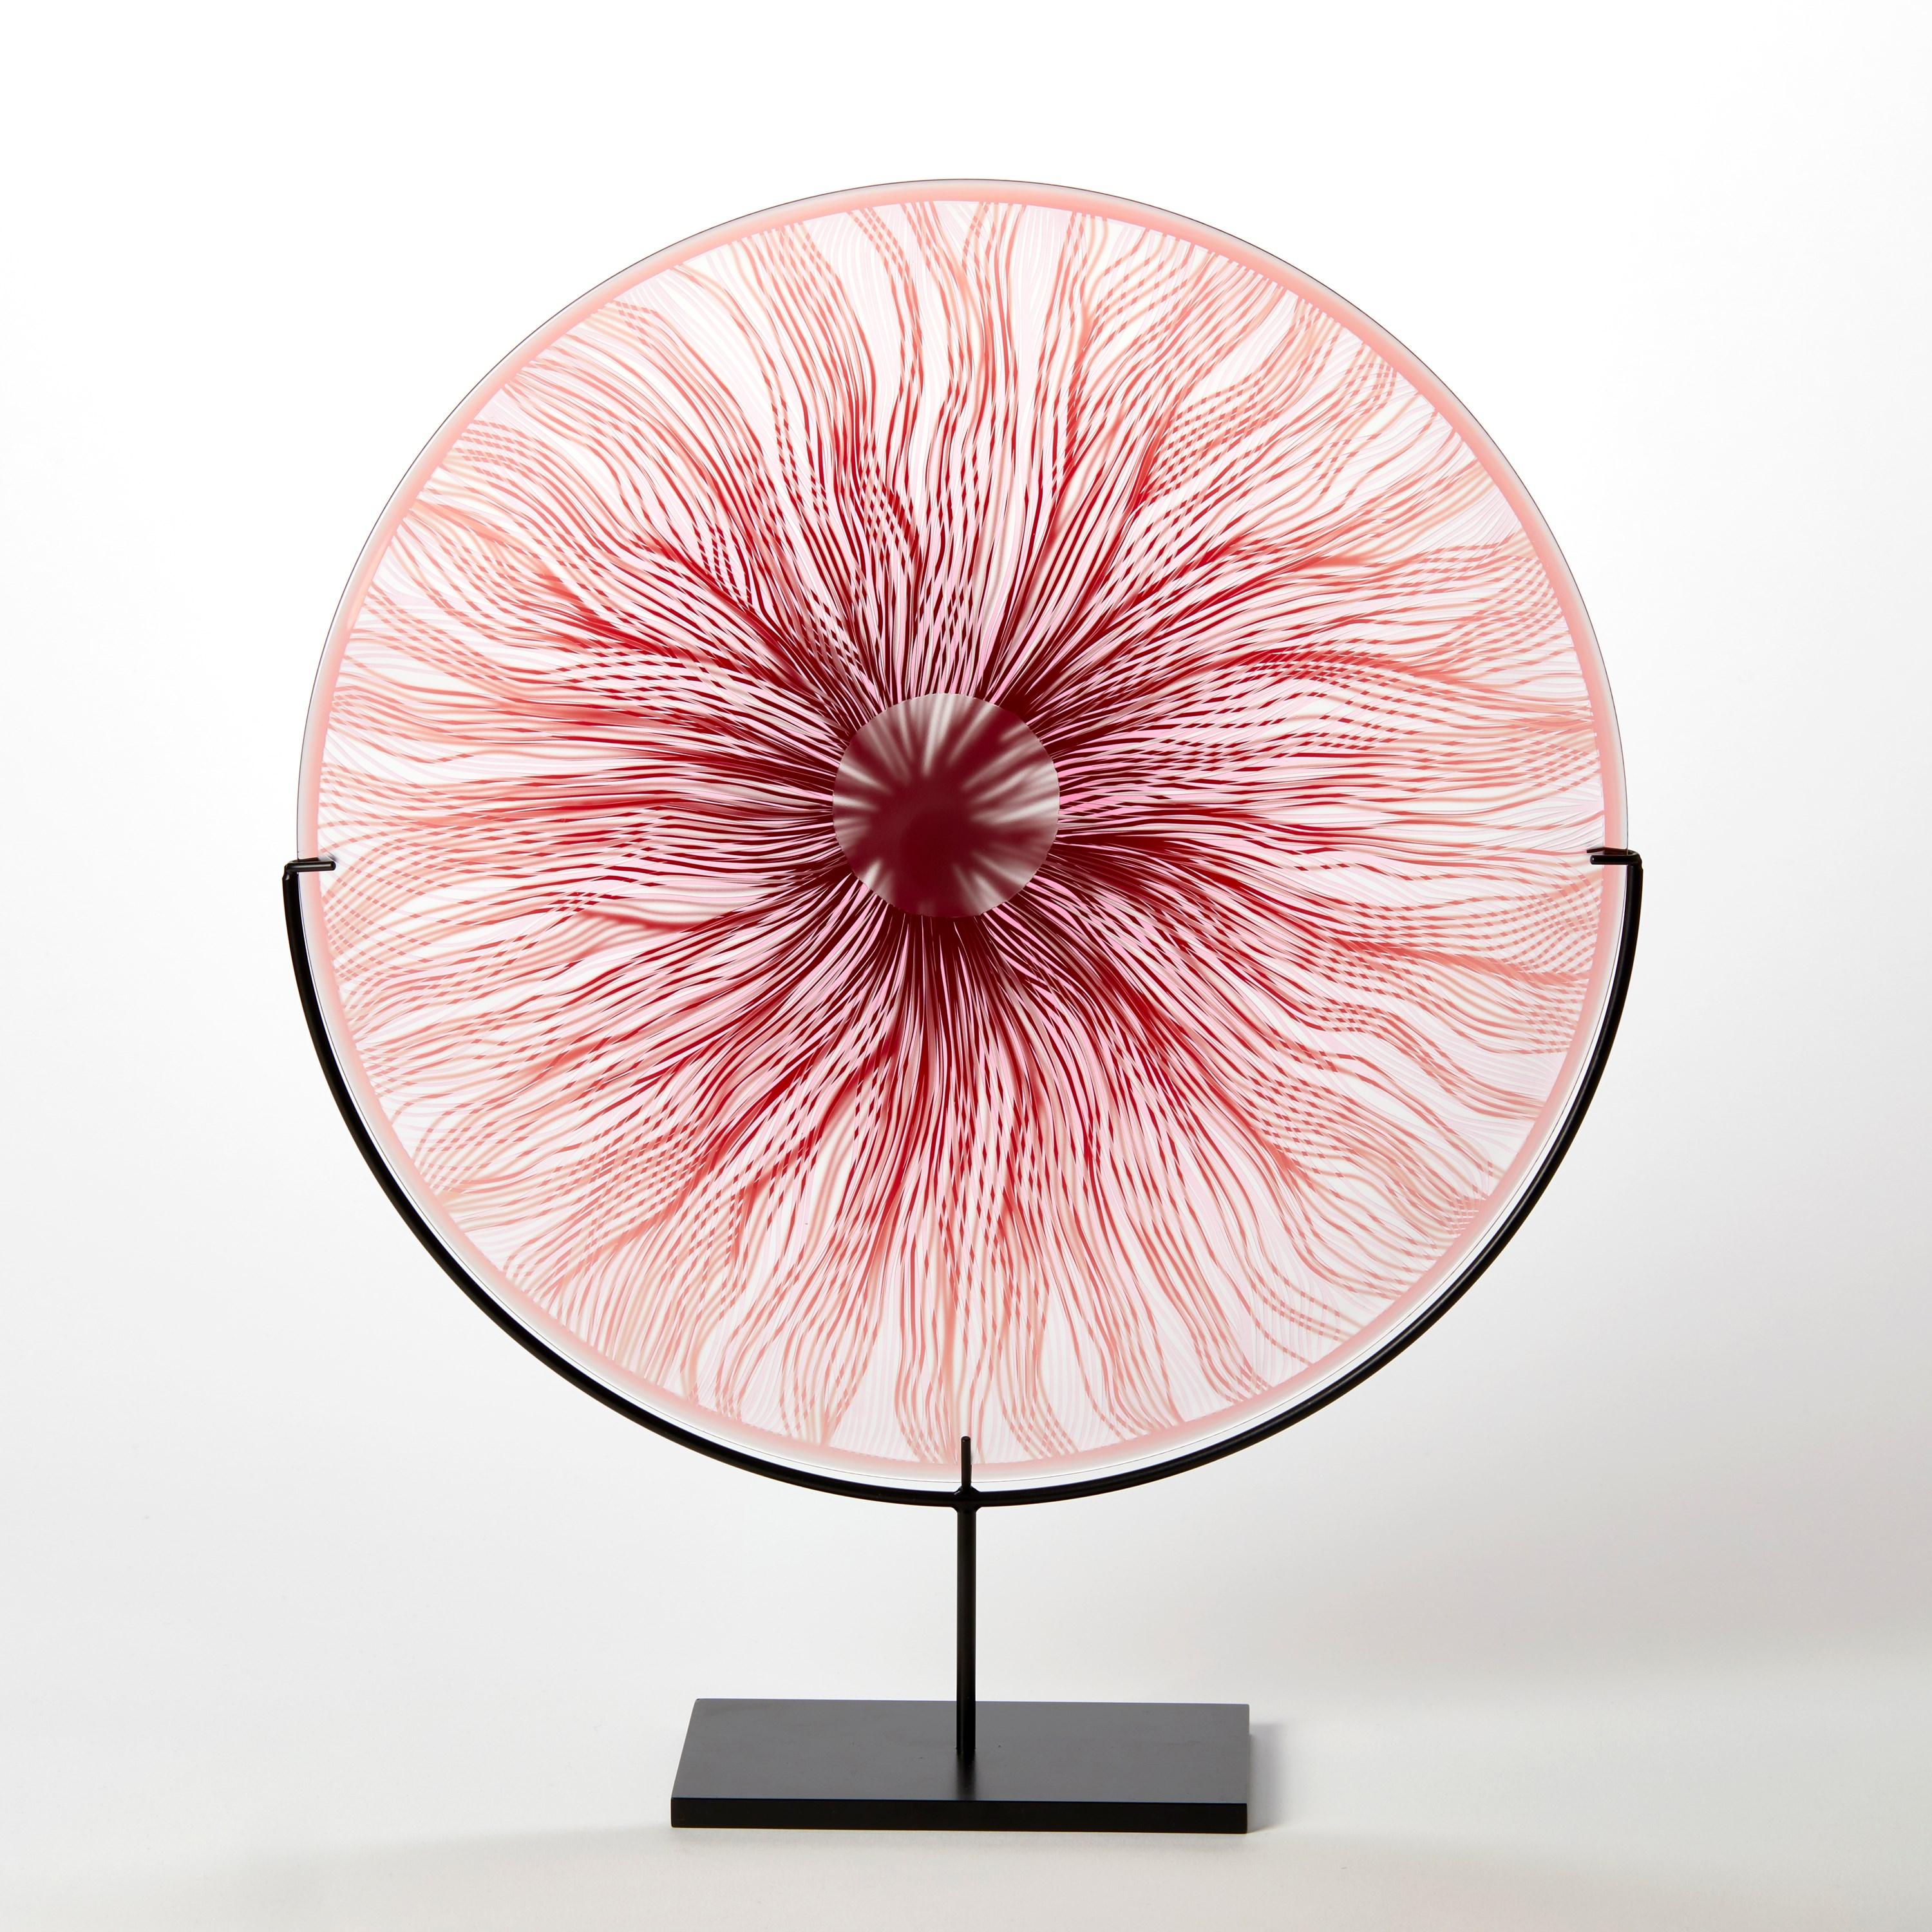 British Solar Storm Ruby Red over Pale Pink, a linear cut glass artwork by Kate Jones For Sale